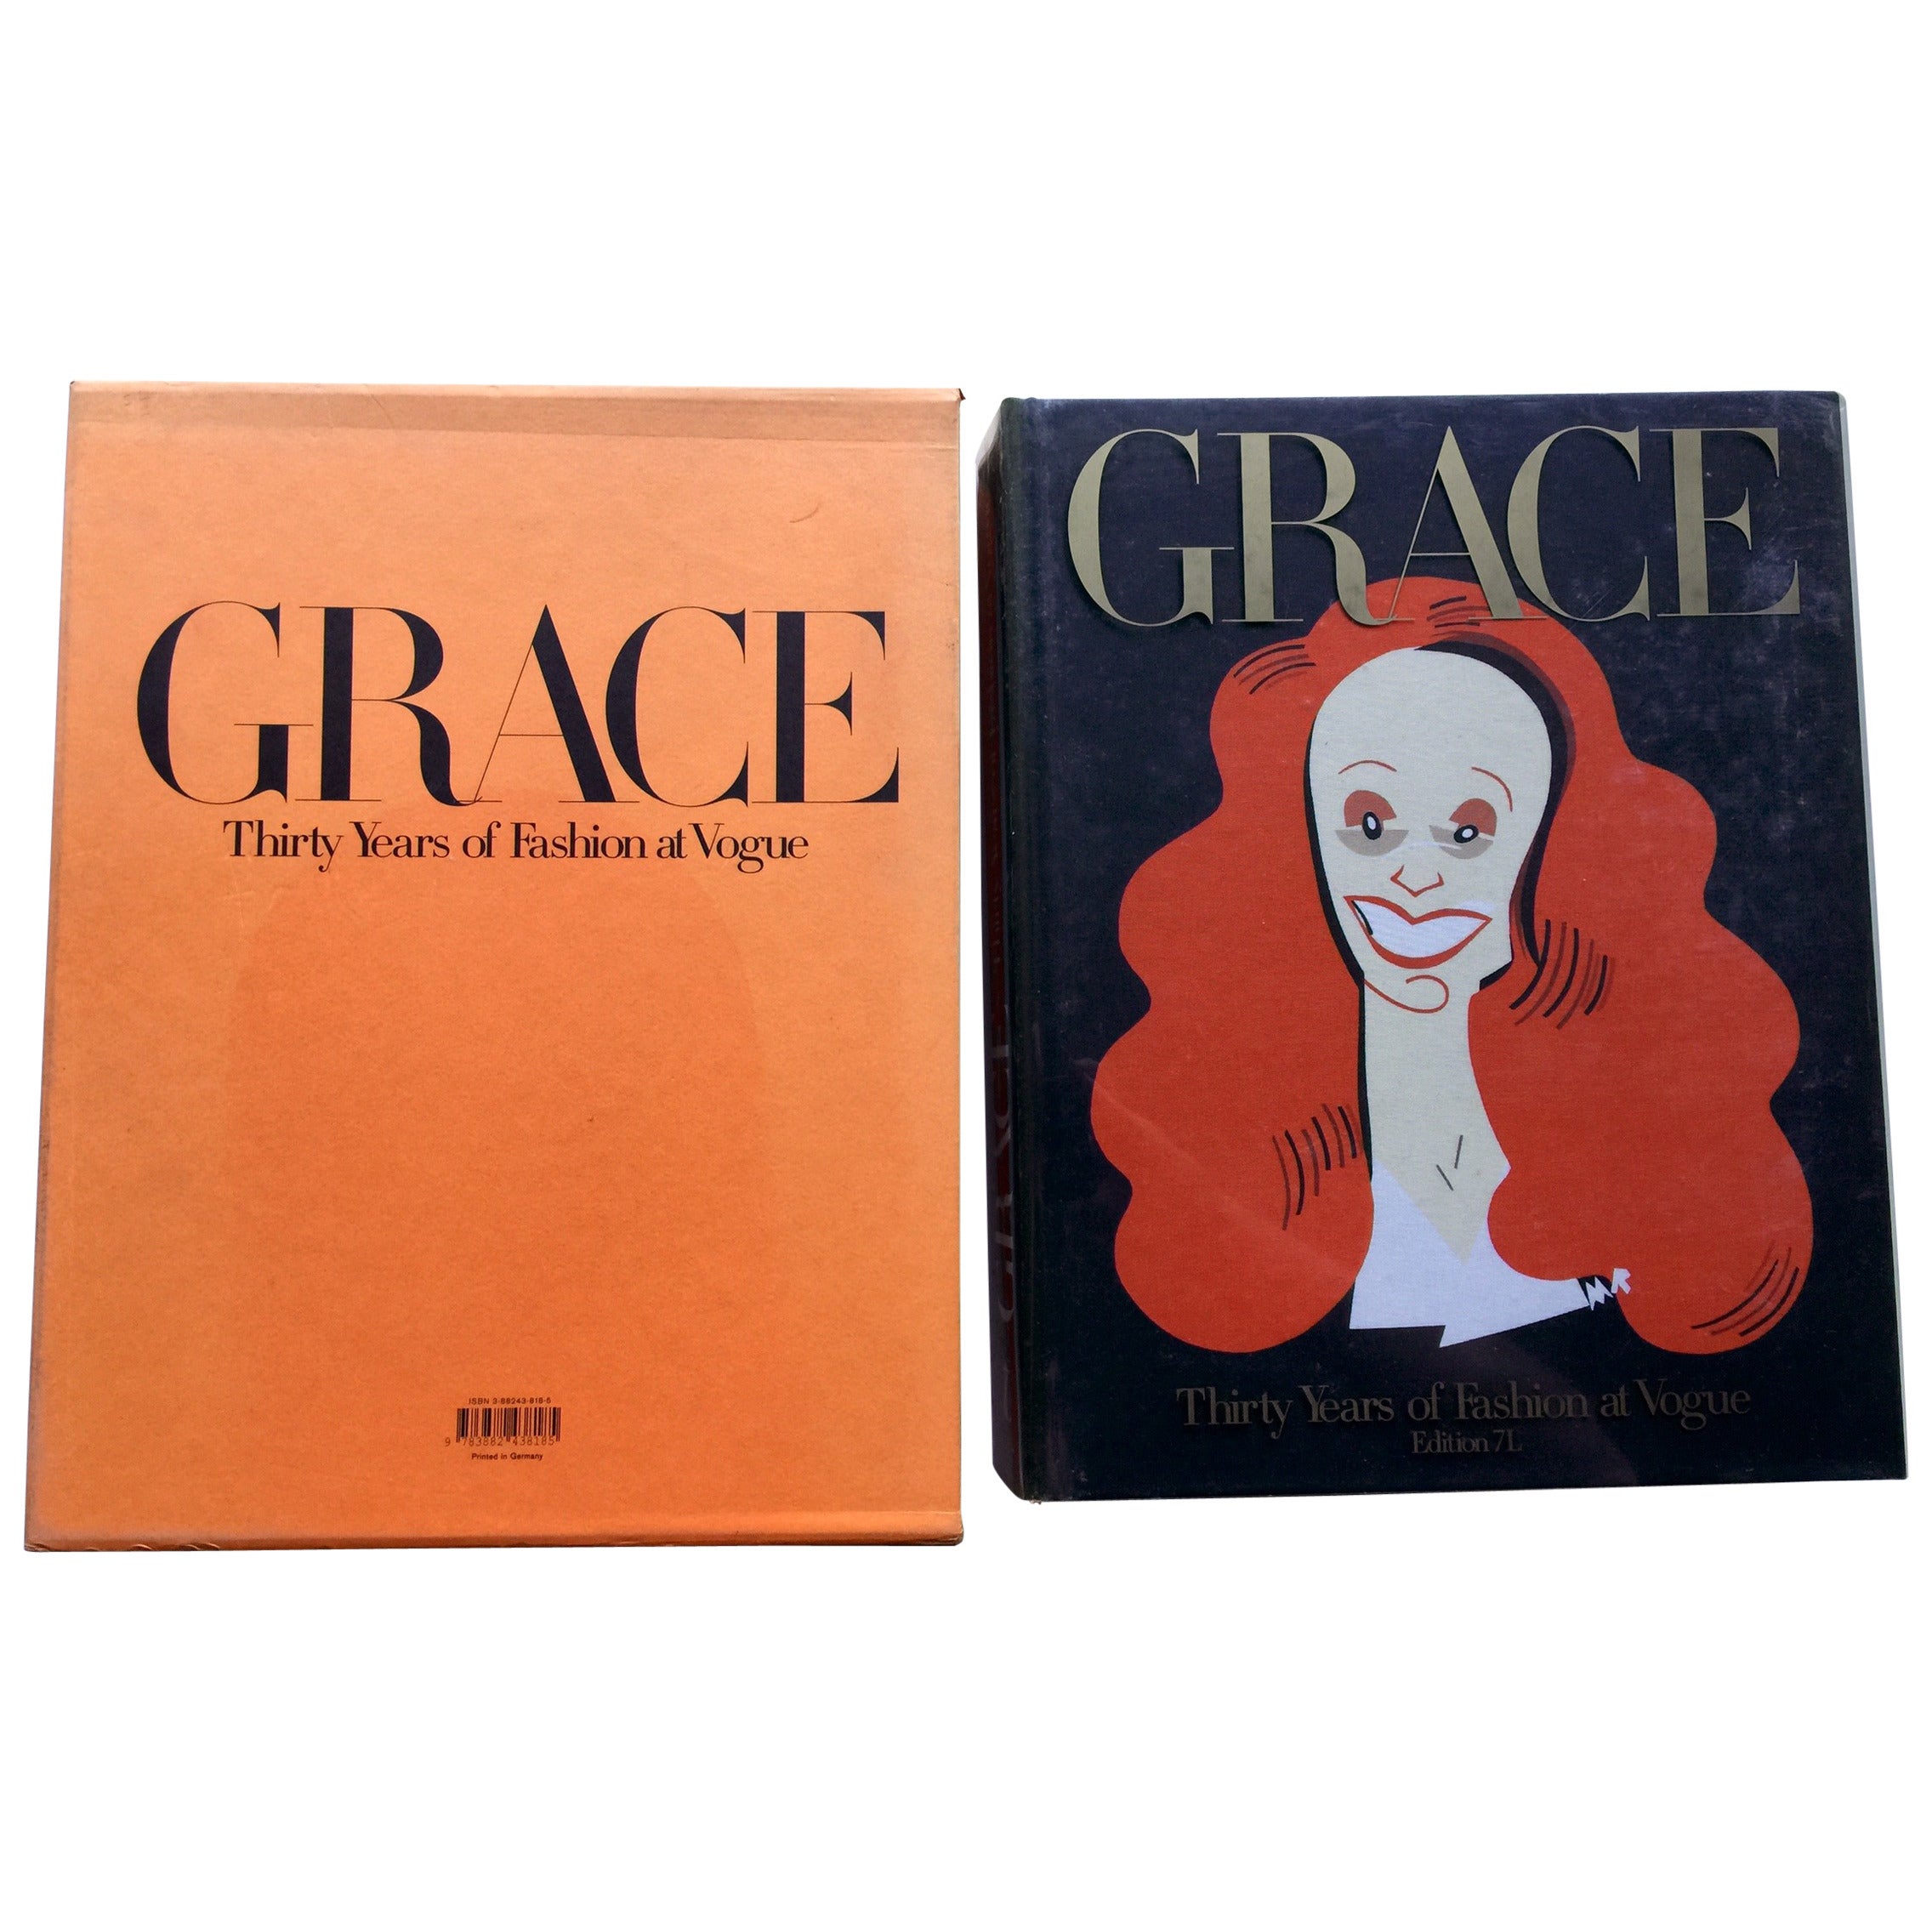 Grace, Thirty Years of Fashion at Vogue, First Edition Book in Original Box  For Sale